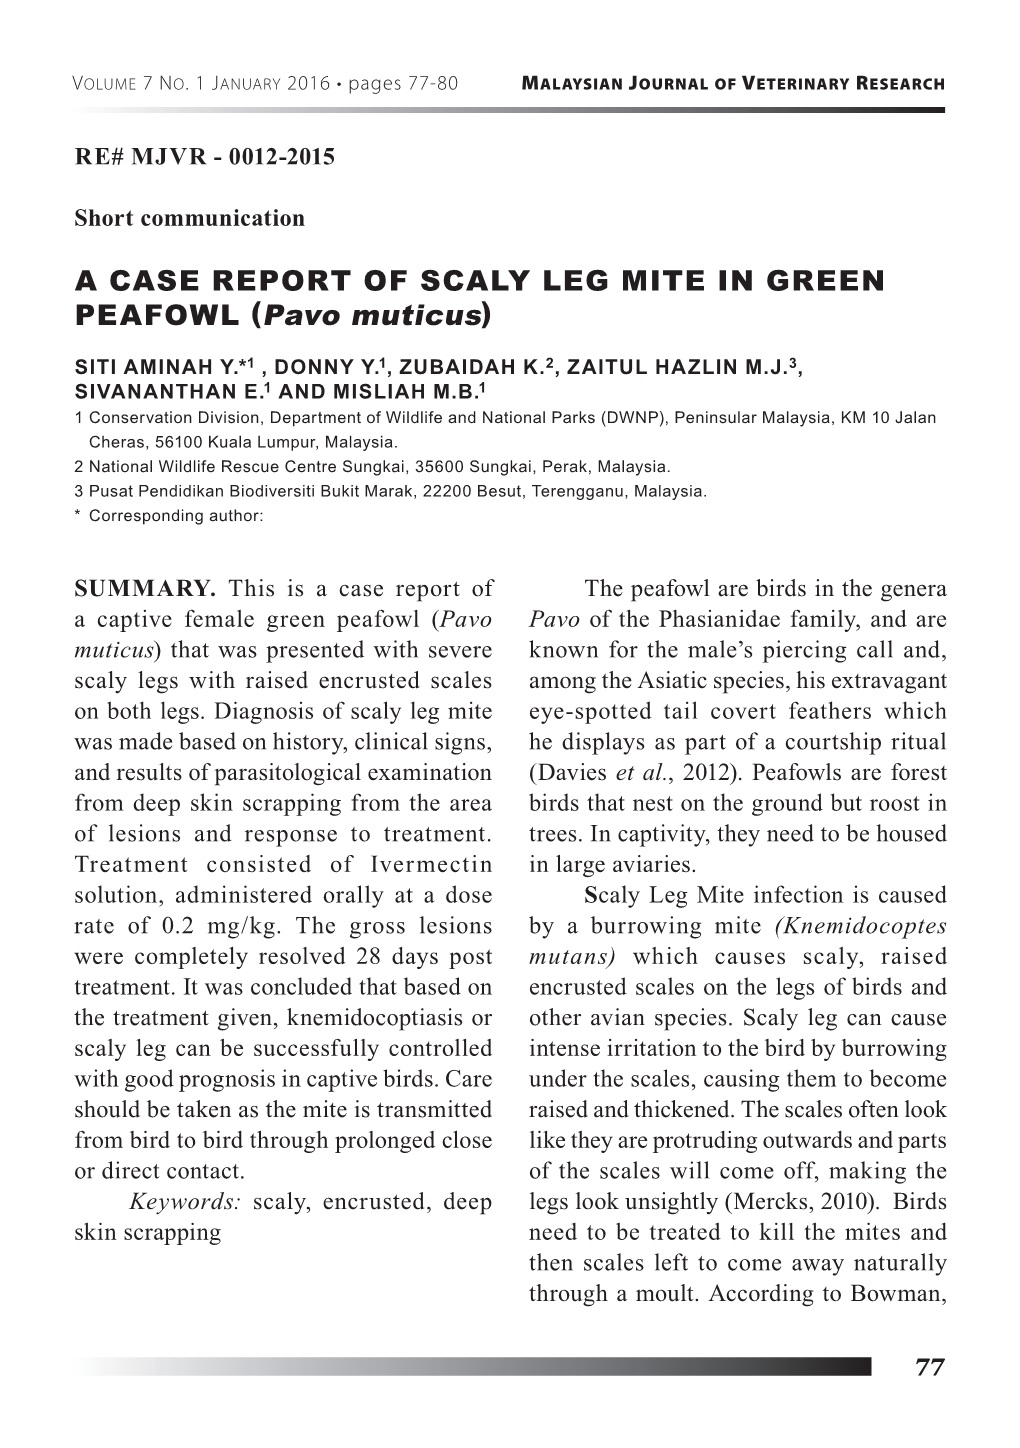 A CASE REPORT of SCALY LEG MITE in GREEN PEAFOWL (Pavo Muticus)